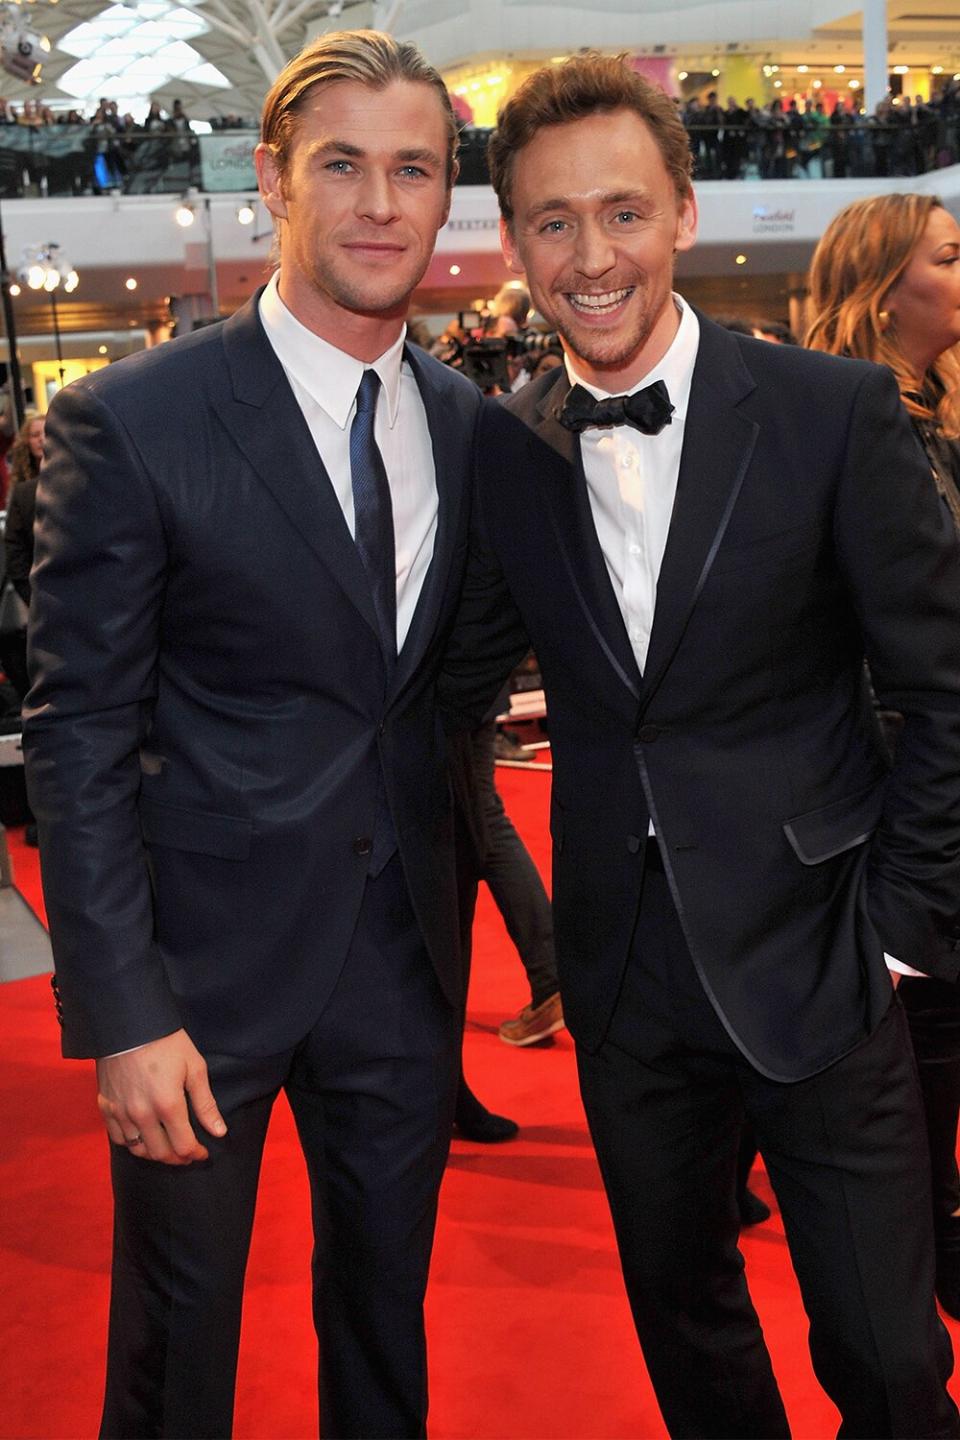 Actors Chris Hemsworth and Tom Hiddleston attend the European Premiere of Marvel Studios' "Marvel's Avengers Assemble" held at the Vue Westfield on April 19, 2012 in London, England.